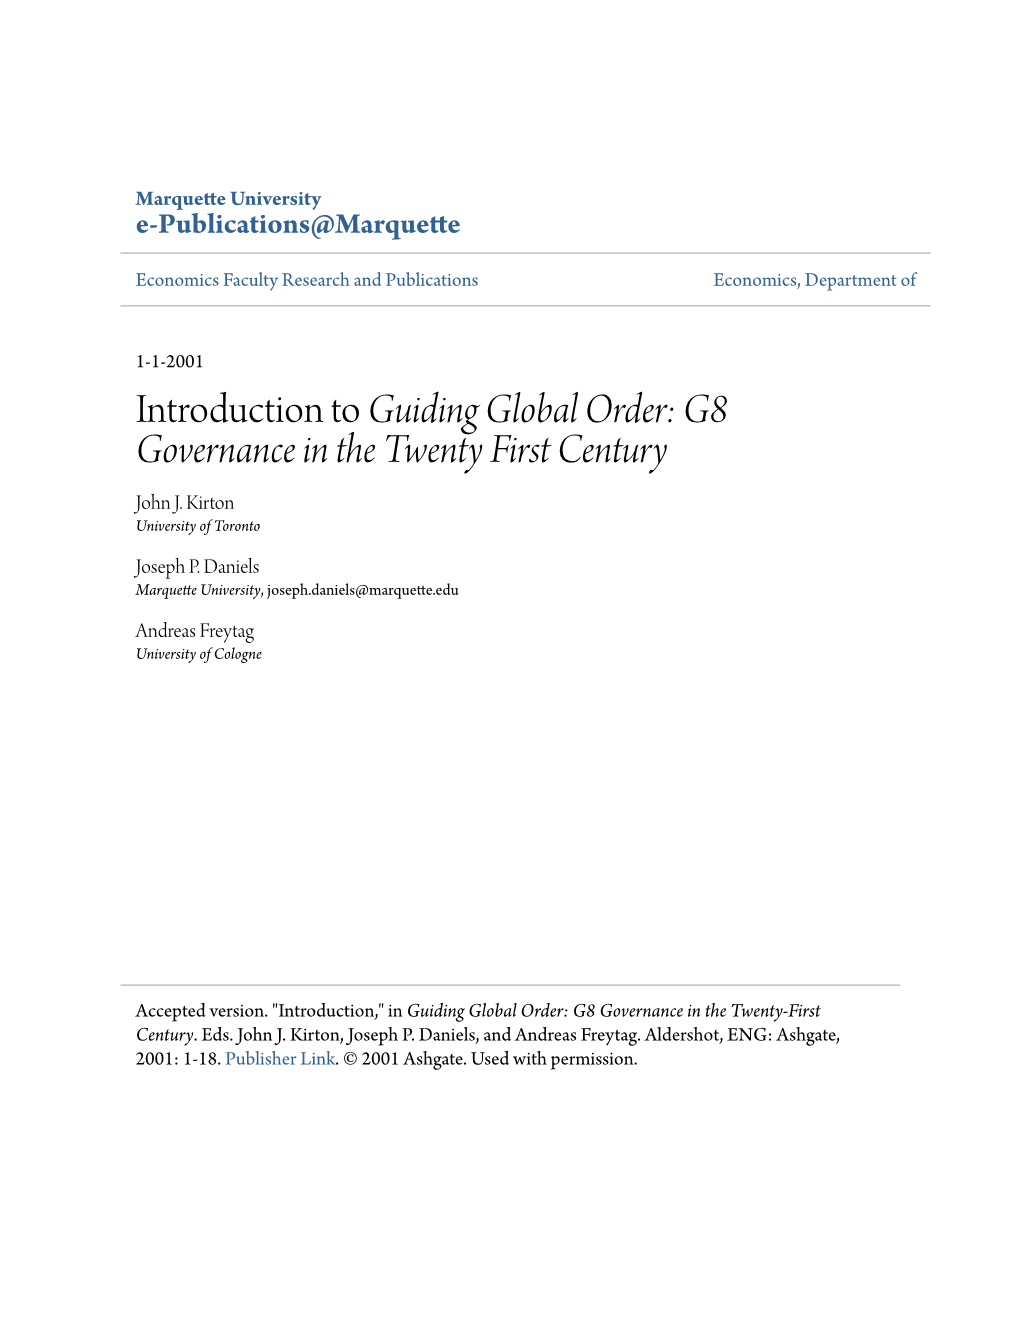 Introduction to Guiding Global Order: G8 Governance in the Twenty First Century John J